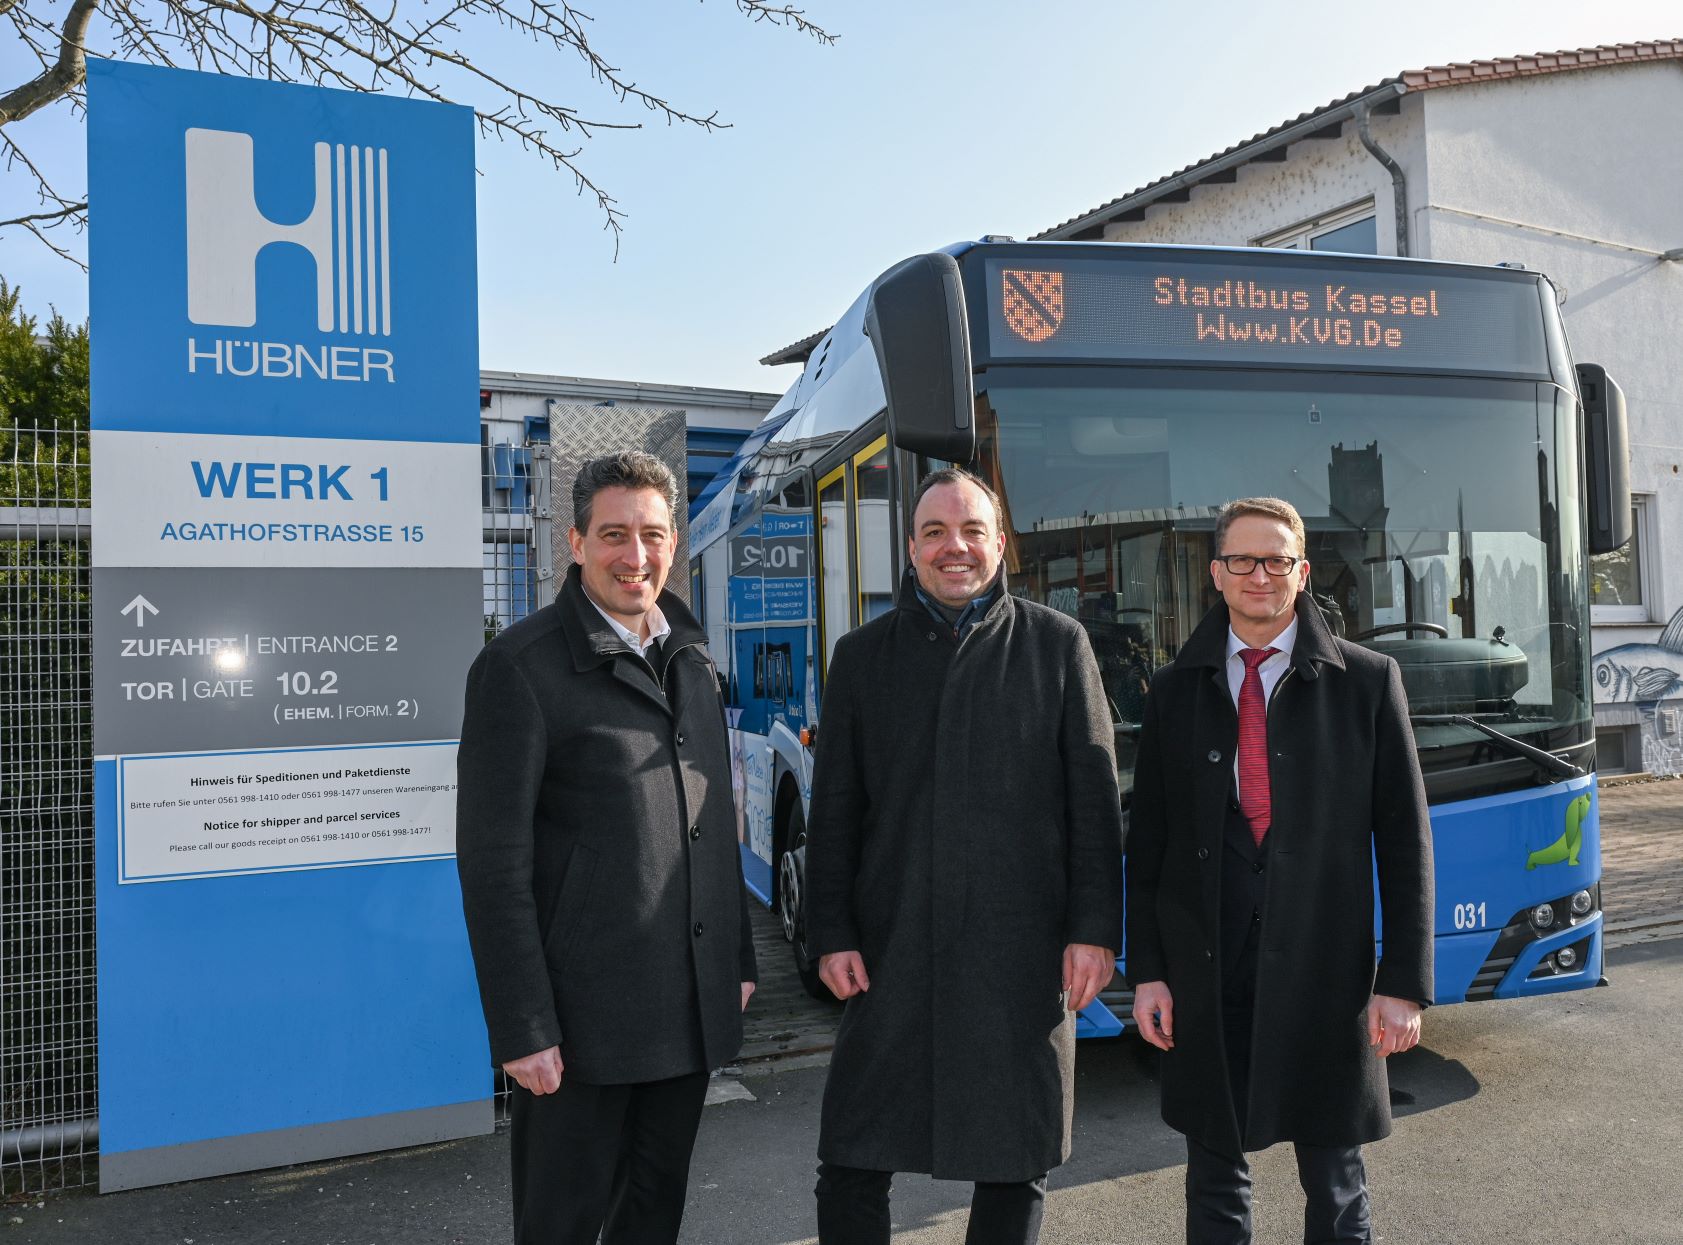 Working together for the future of mobility – KVG moves into the former headquarters of the HÜBNER Group